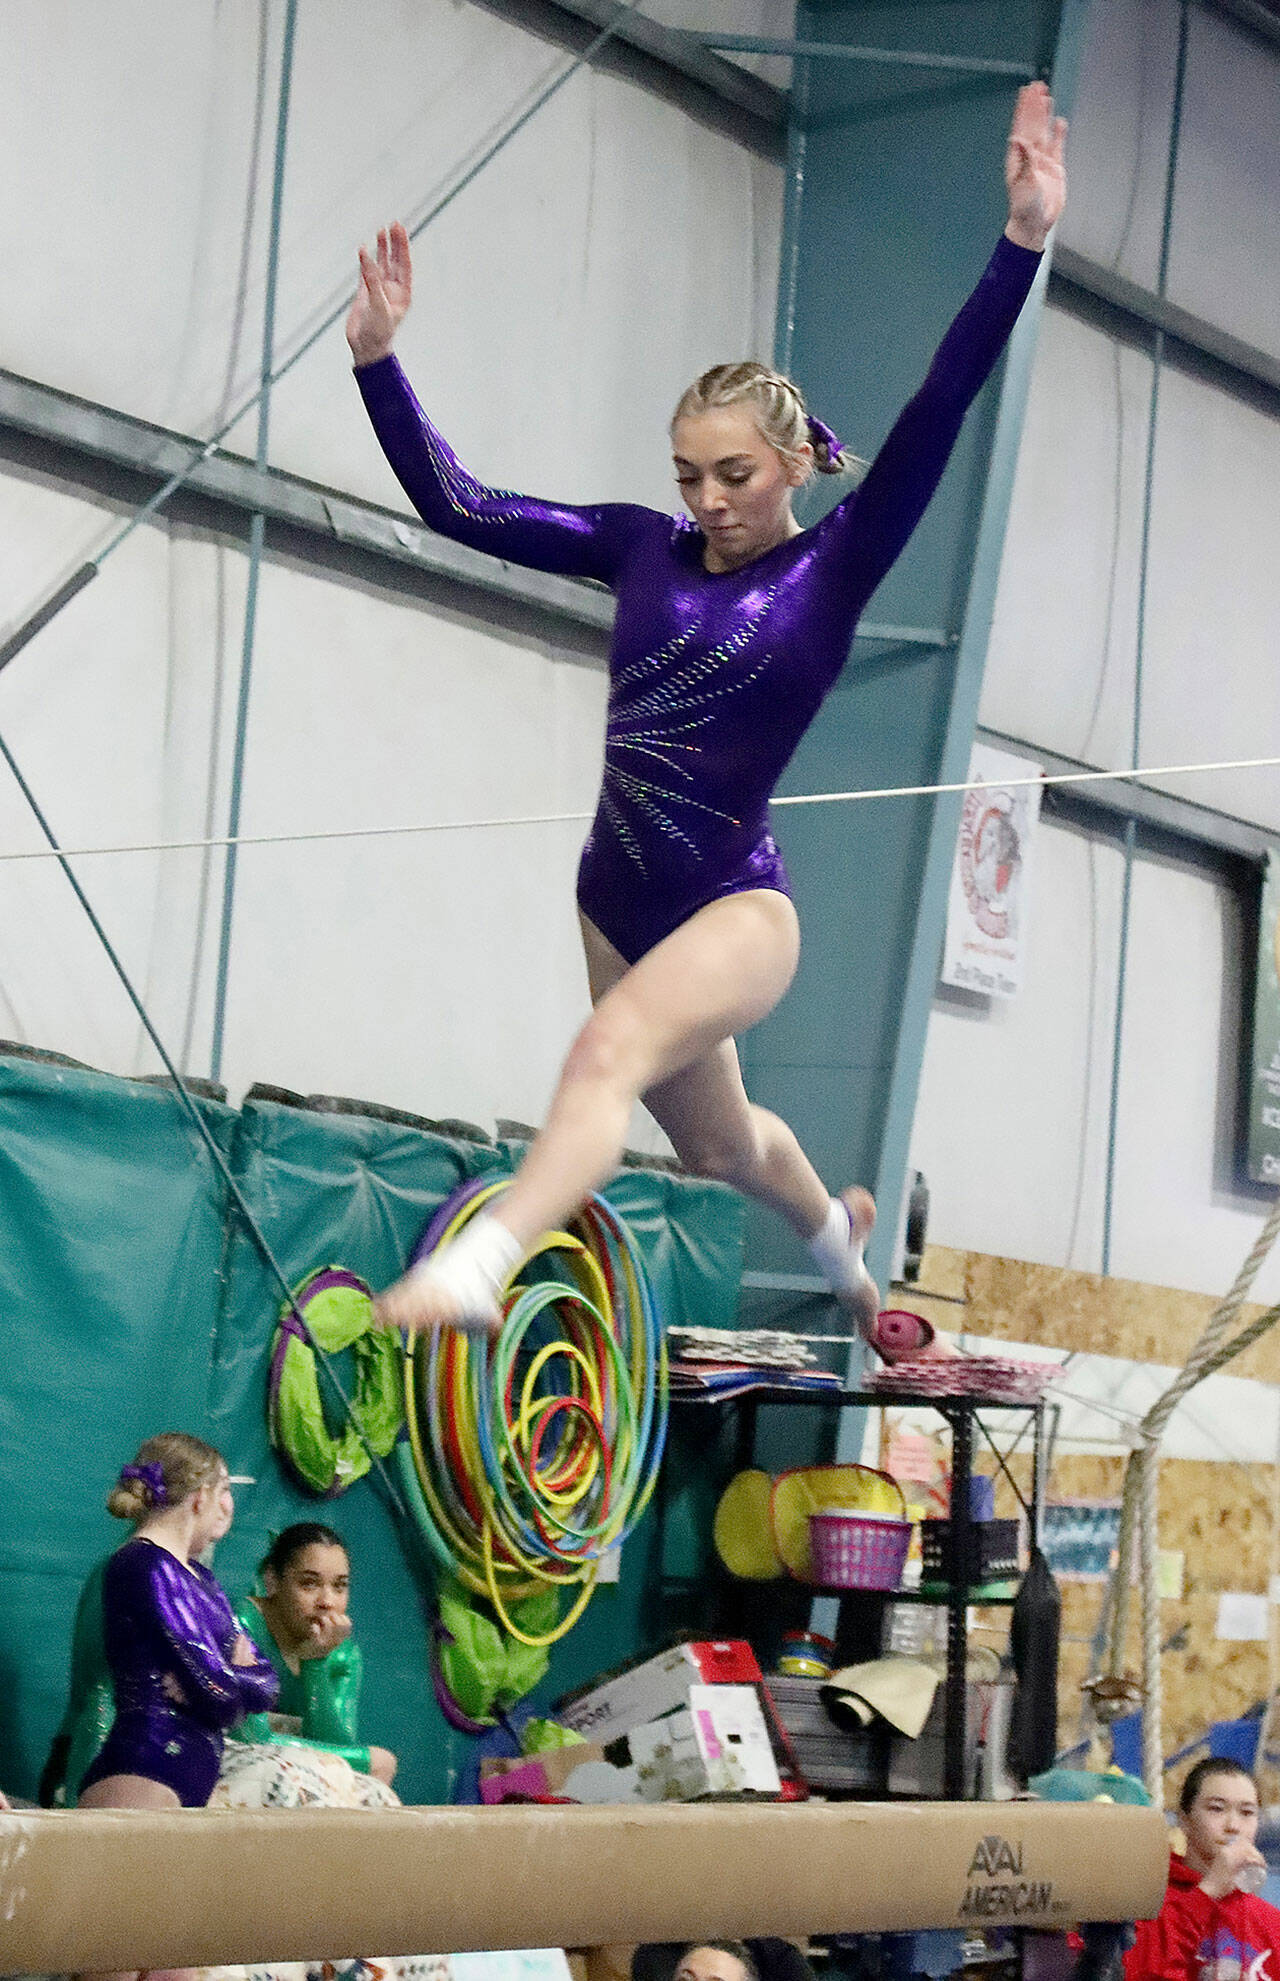 Susannah Sharp of Sequim, competing for the joint Port Angeles/Sequim gymnastics team, preforms on the balance beam Monday at a meet in Port Angeles against Bainbridge. Bainbridge edged Port Angeles/Sequim 164-139. (Dave Logan/for Peninsula Daily News)